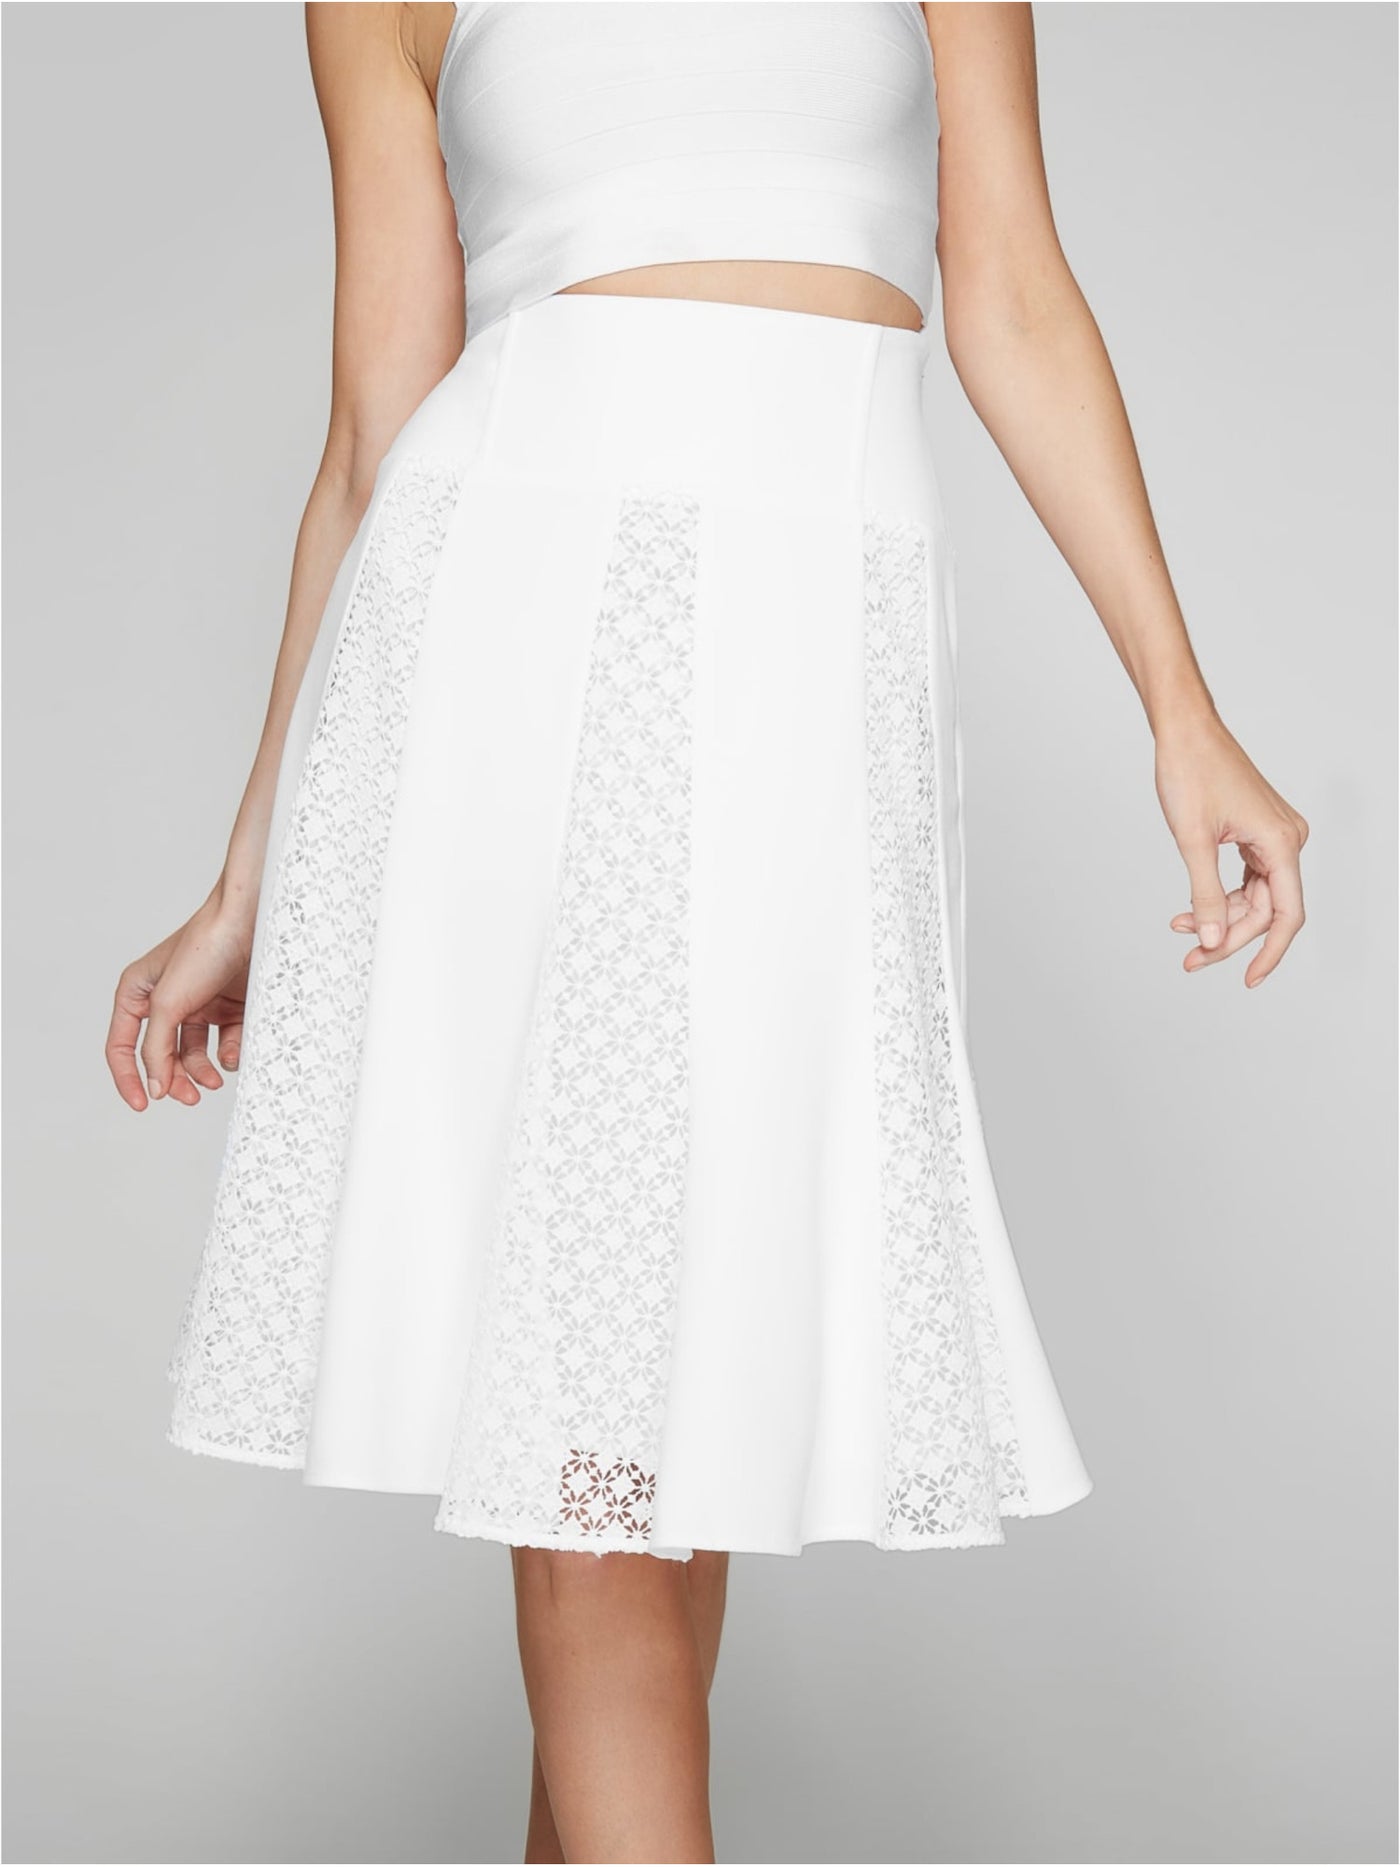 MARCIANO Womens White Lace Zippered Lined Below The Knee Party A-Line Skirt M